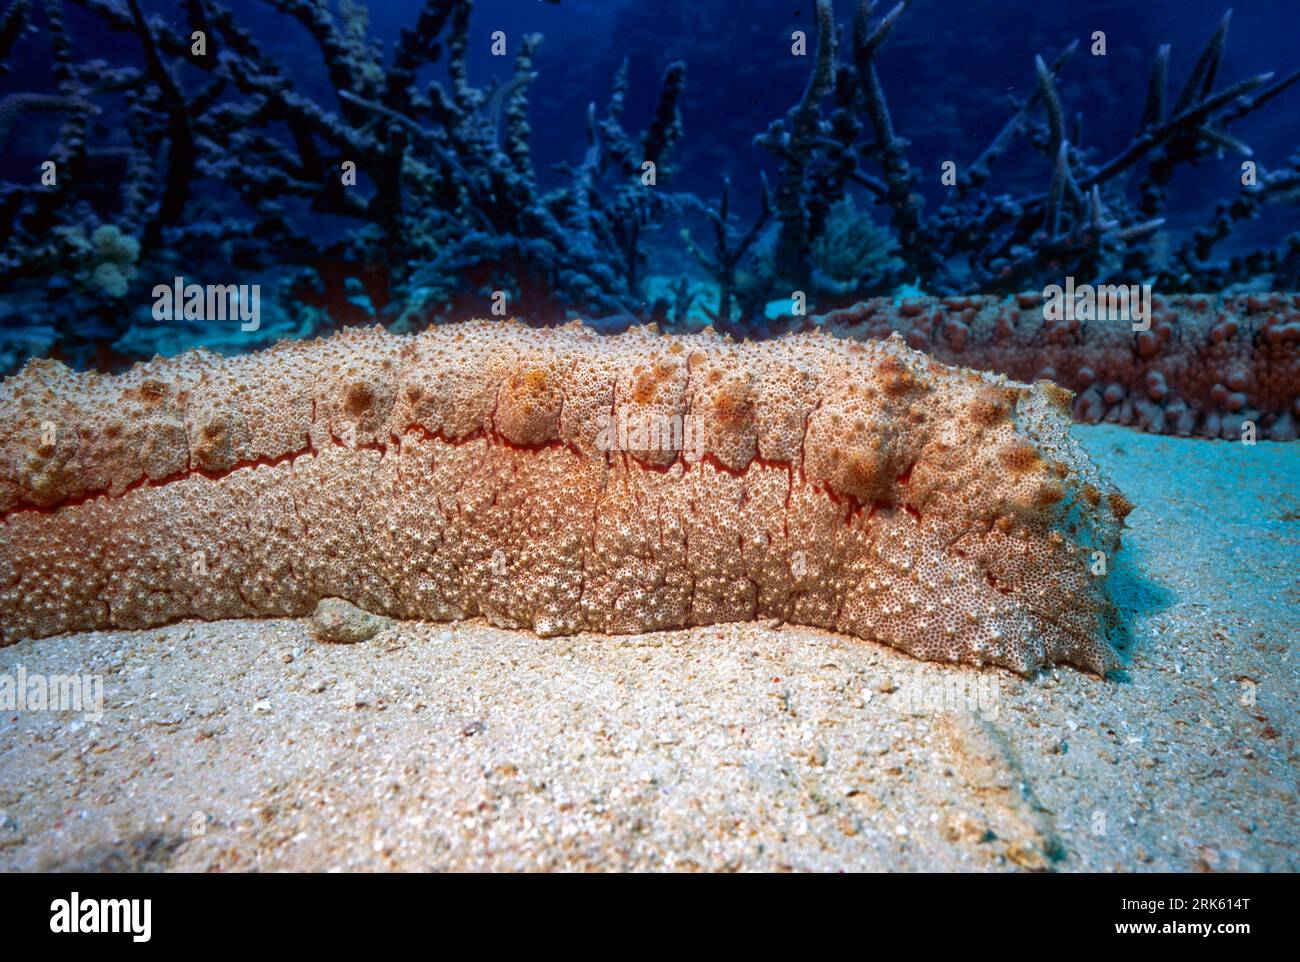 Amber fish (Thelenota anax), a sea cucumber photographed at Agincourt Reef, the Great Barrier Reef, Australia. Stock Photo